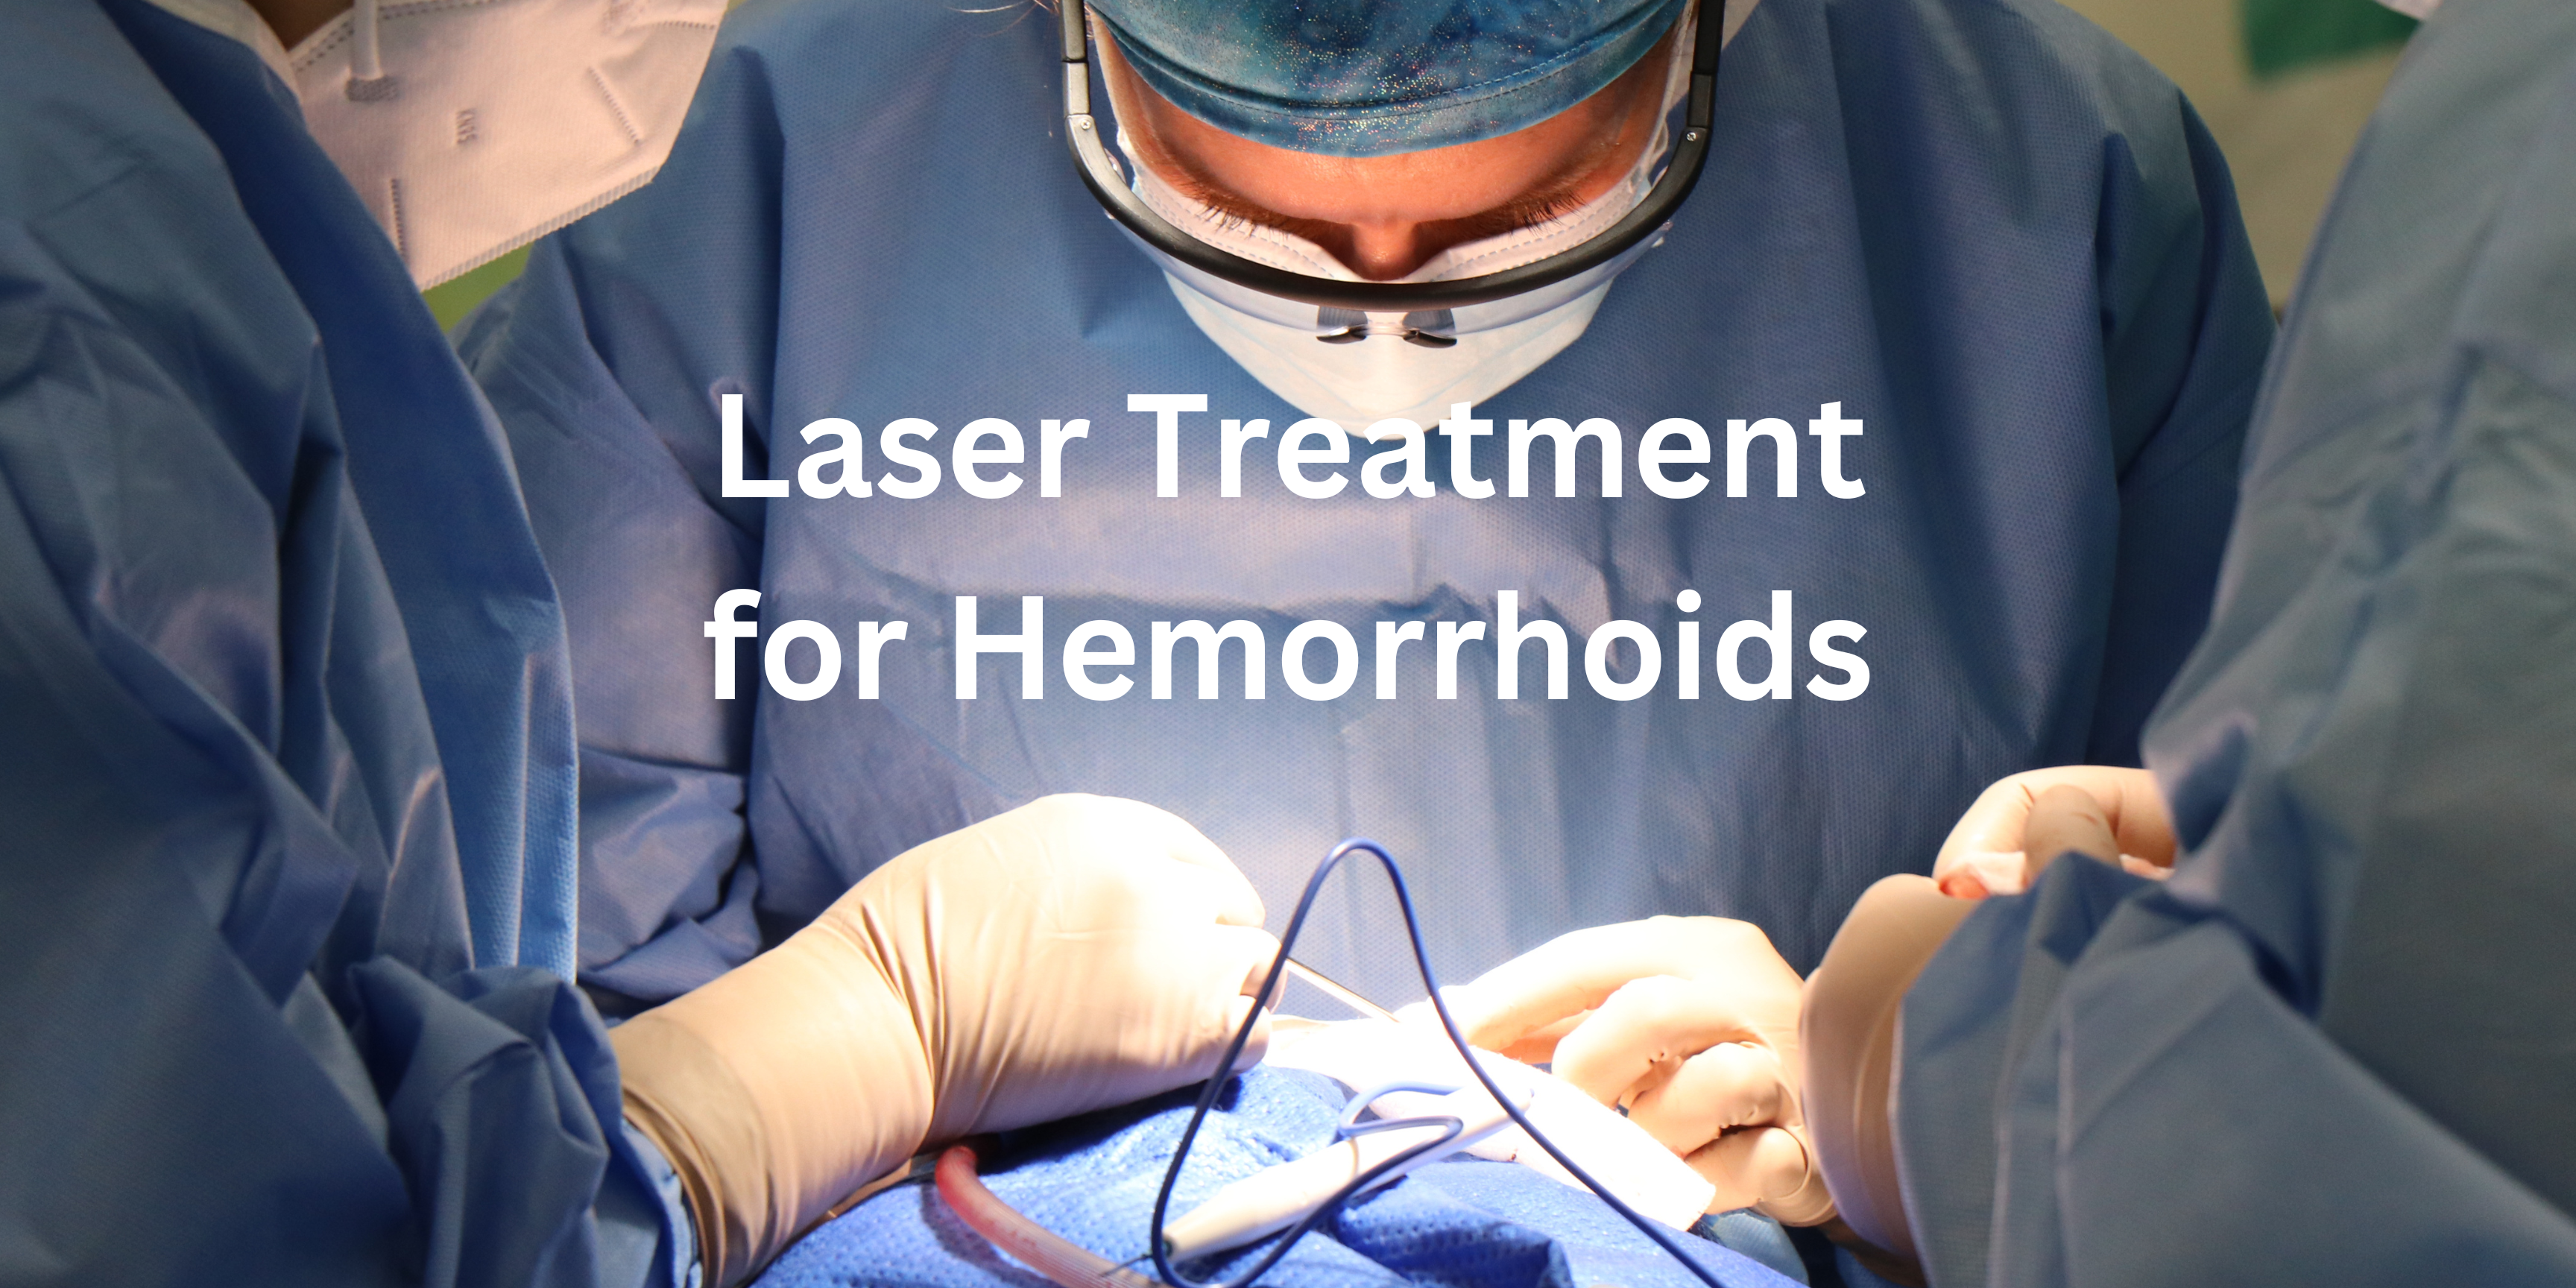 What is the Procedure for Laser Treatment of Hemorrhoids?